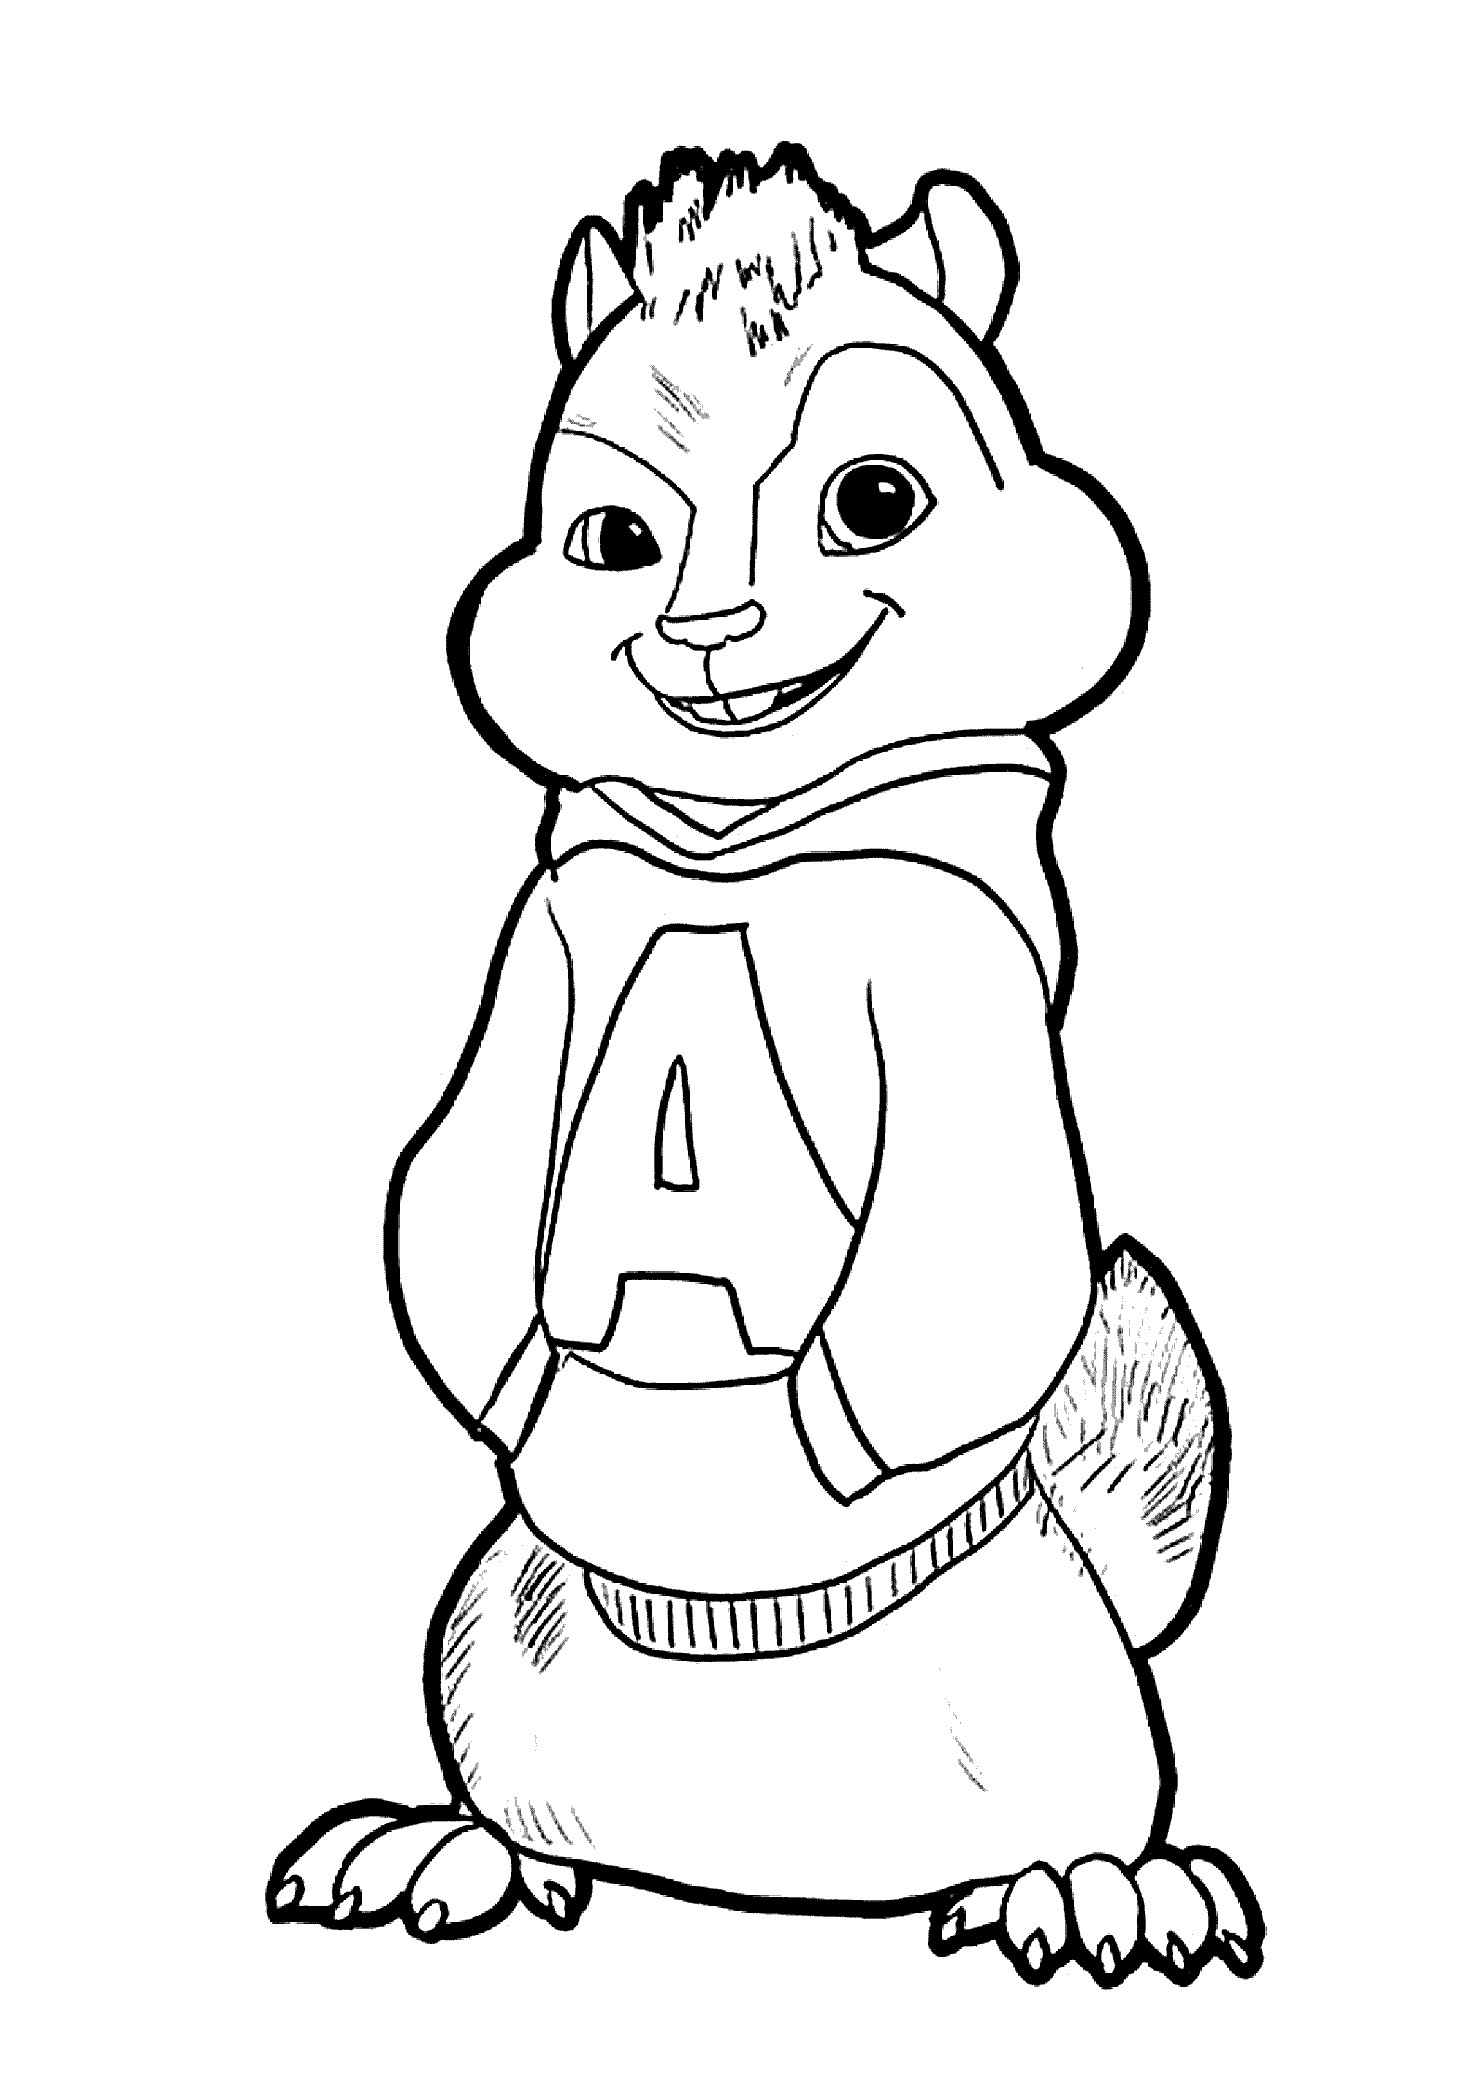 Print Free Coloring Sheets
 Free Printable Coloring Pages Alvin And The Chipmunks